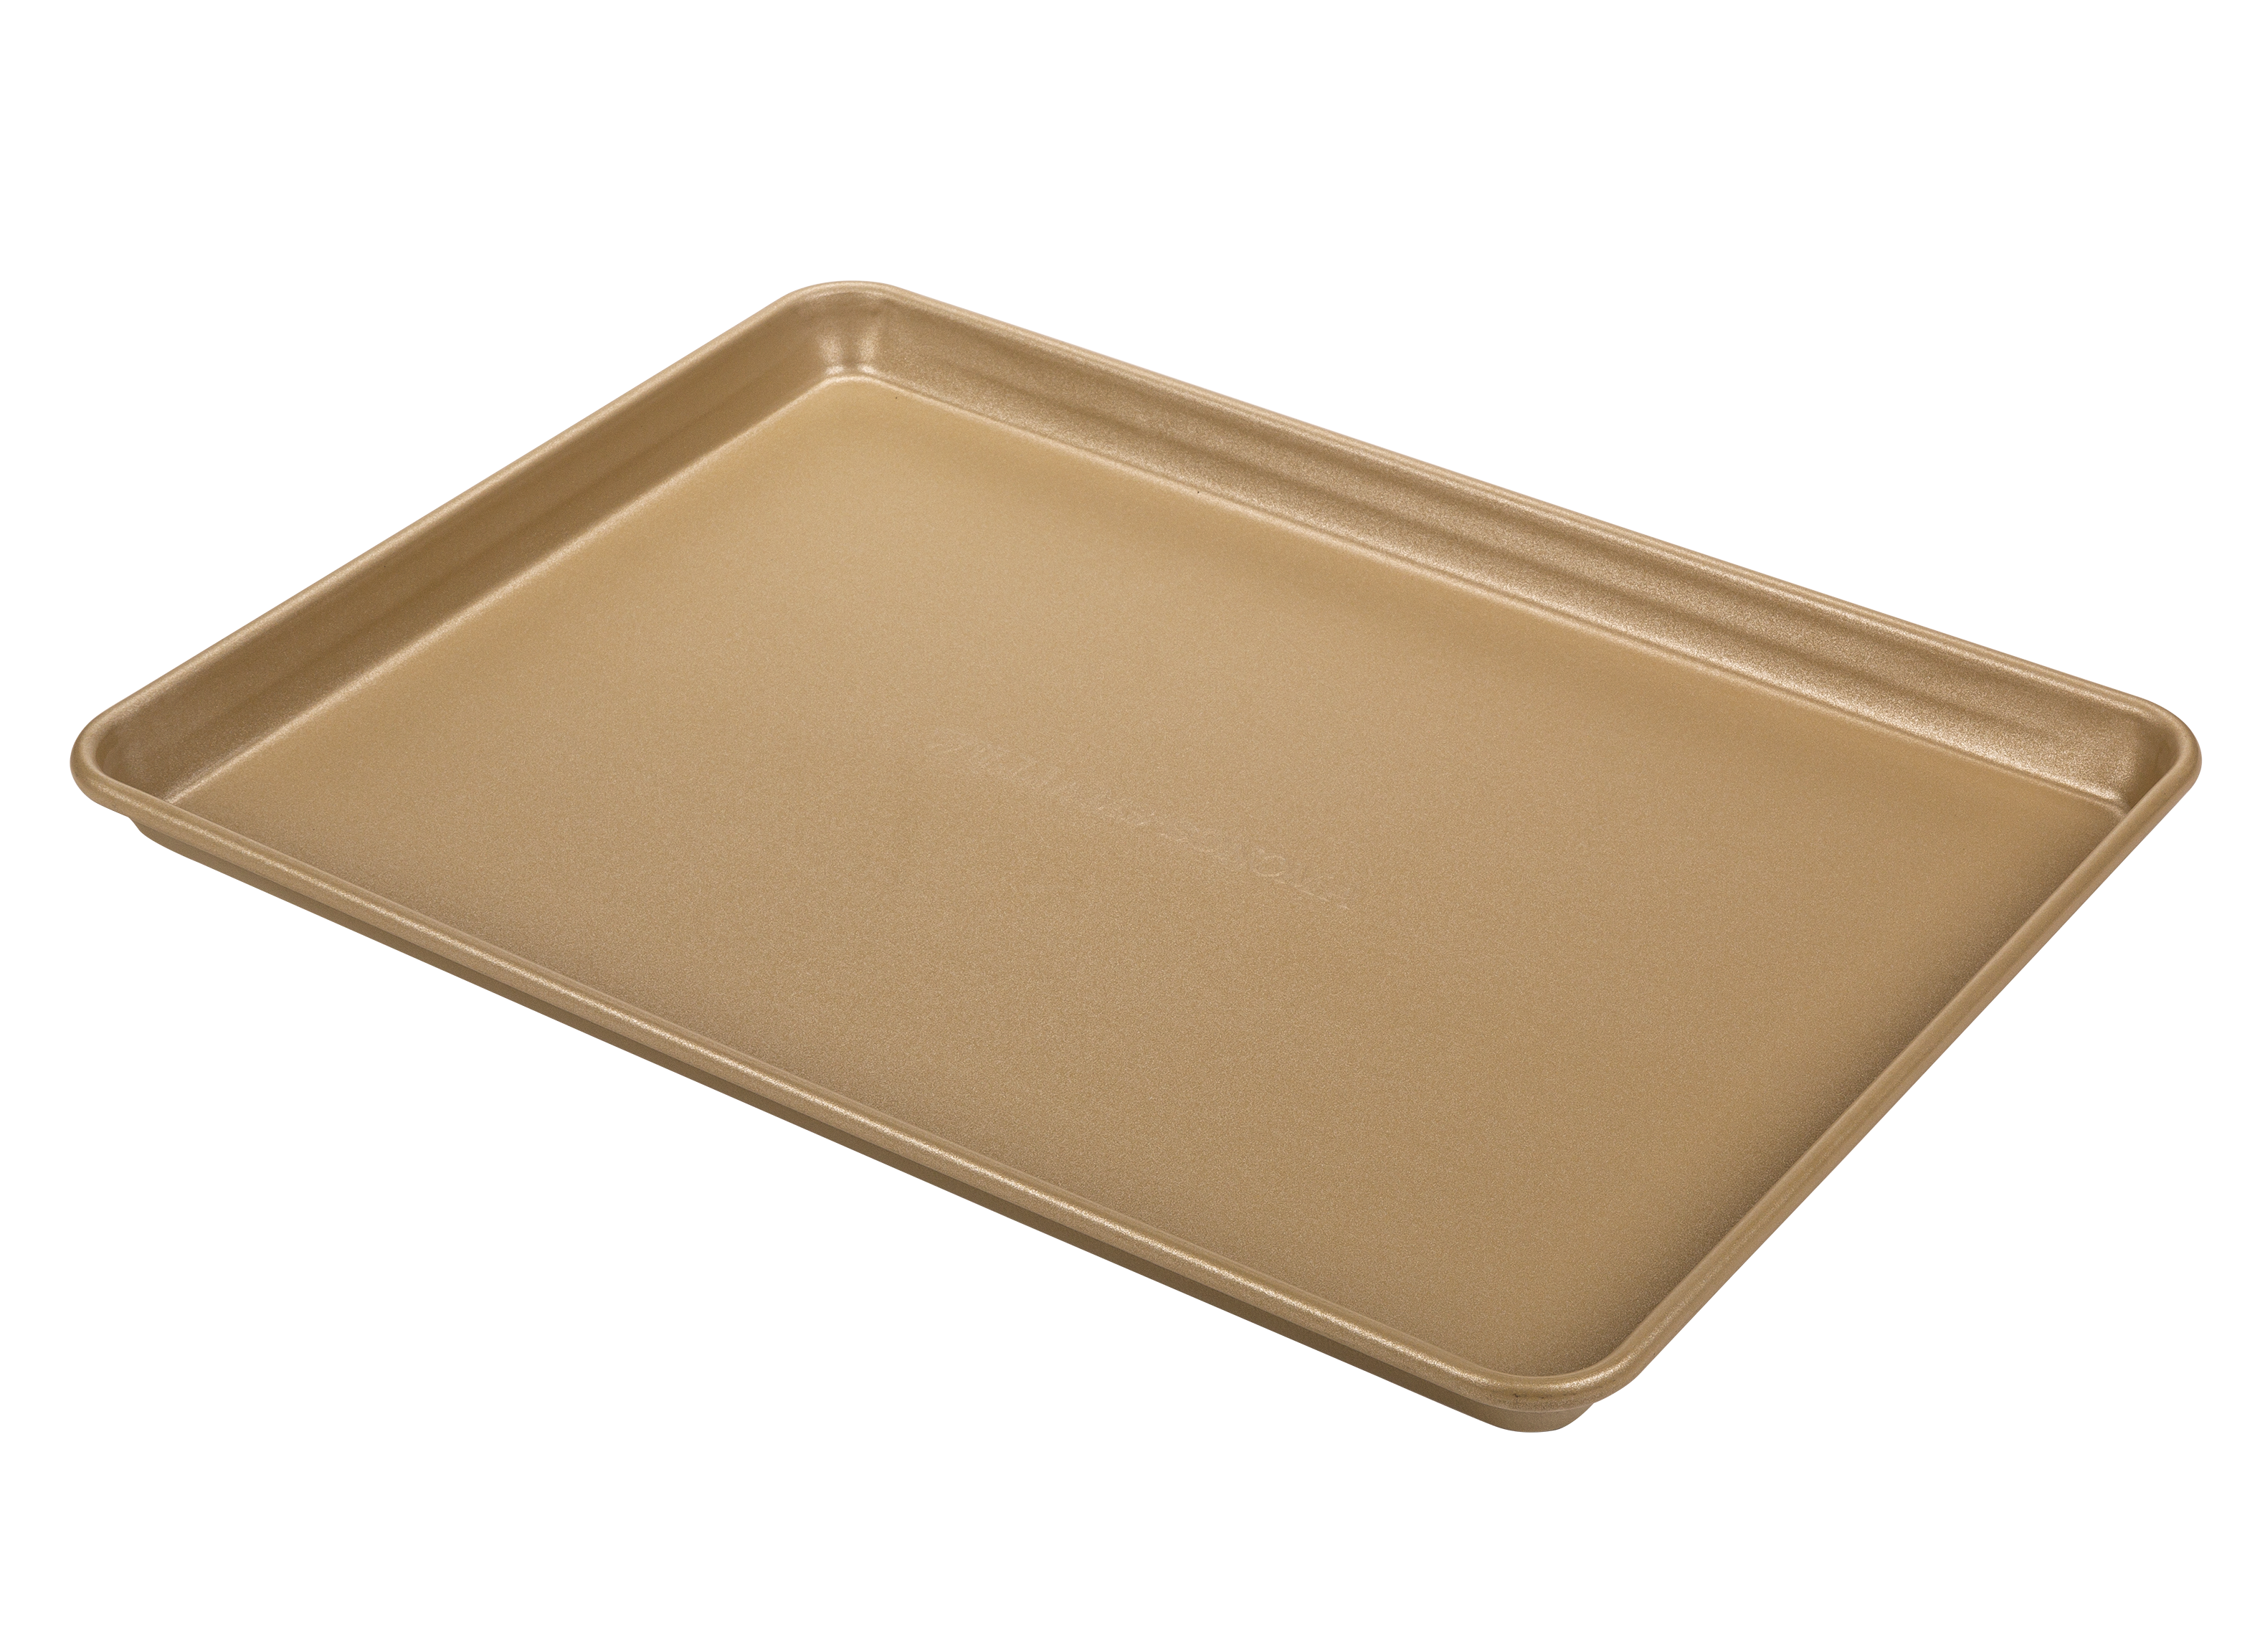 USA Pans, William Sonoma, Jelly Roll Pan, Baking Pan, Goldtone, NEW